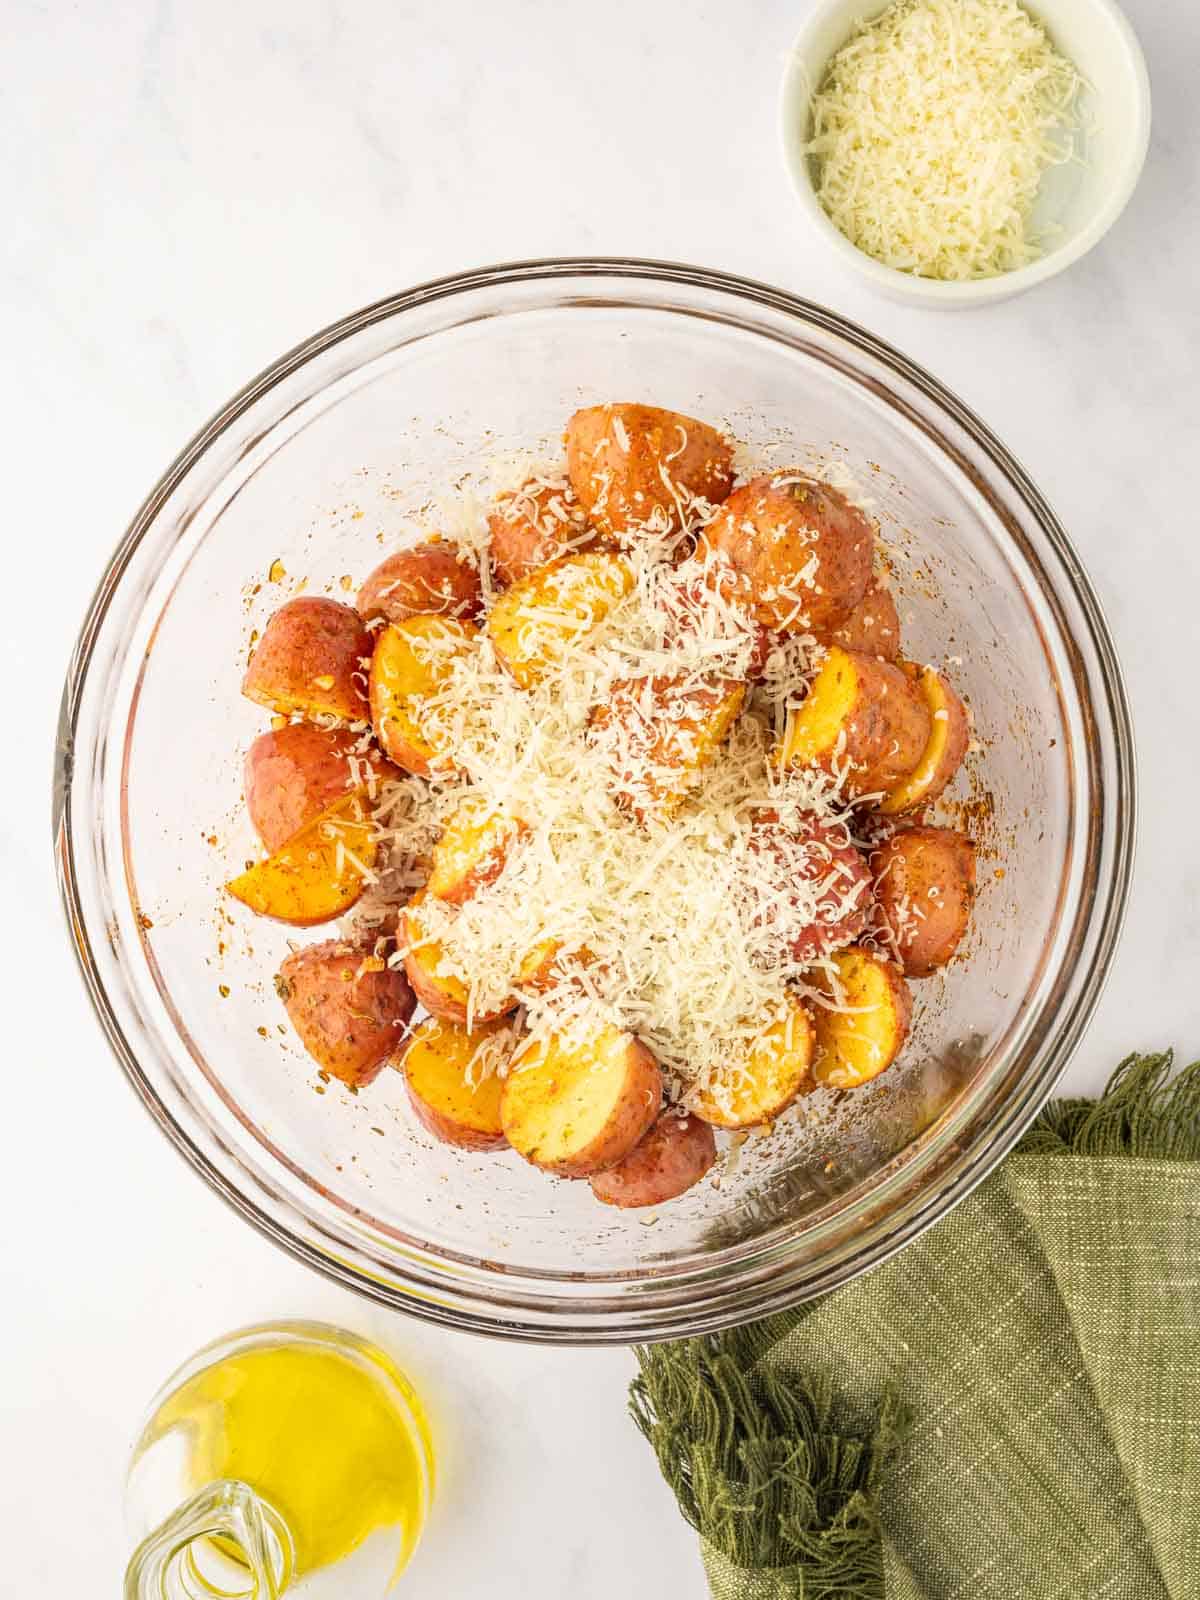 Parmesan cheese is sprinkled over potatoes.